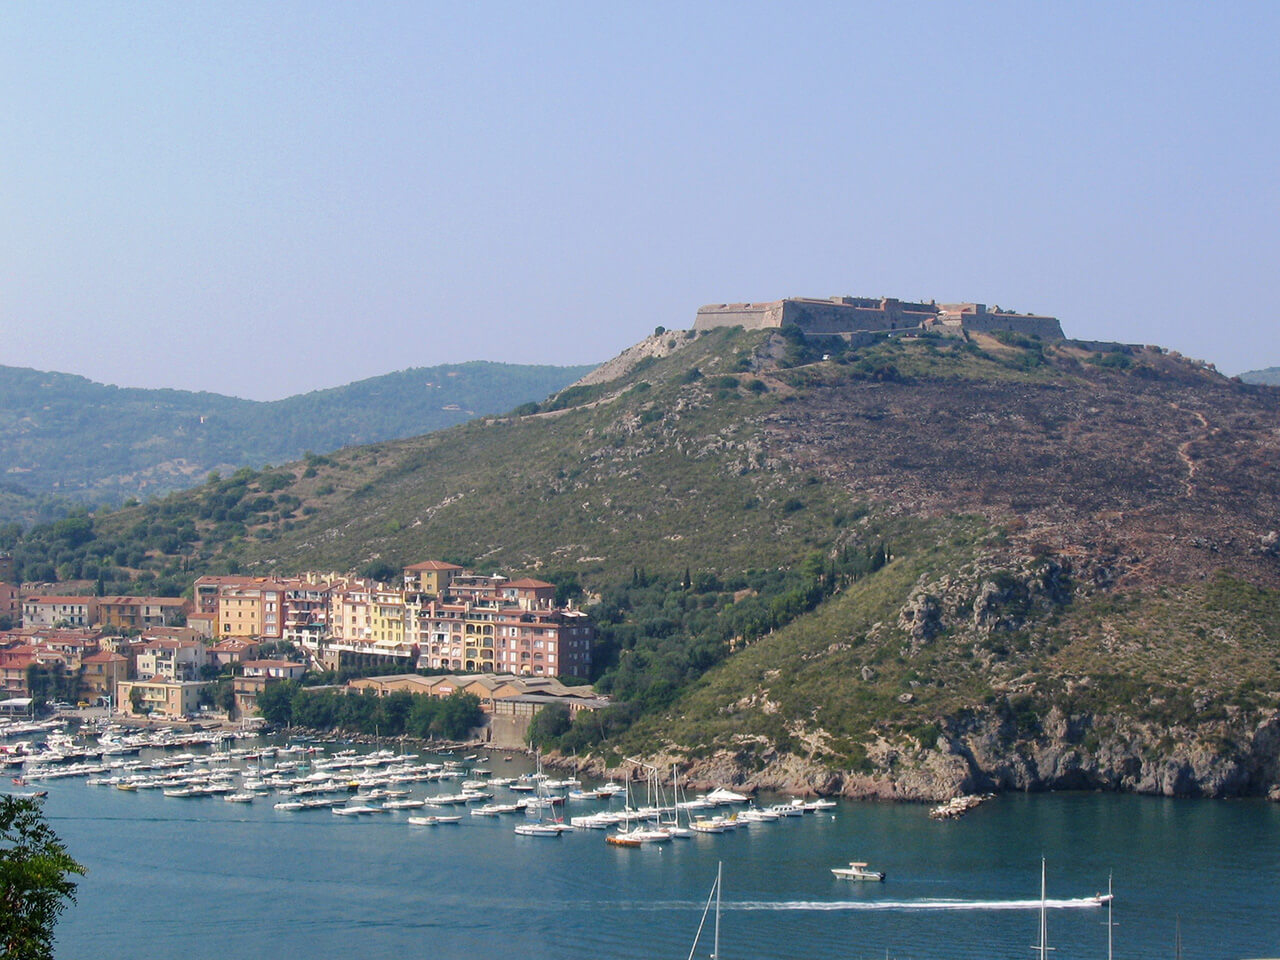 Porto Ercole is where the famous painter Caravaggio is believed to have died, fleeing from the law; his grave can be visited in the town cemetery.